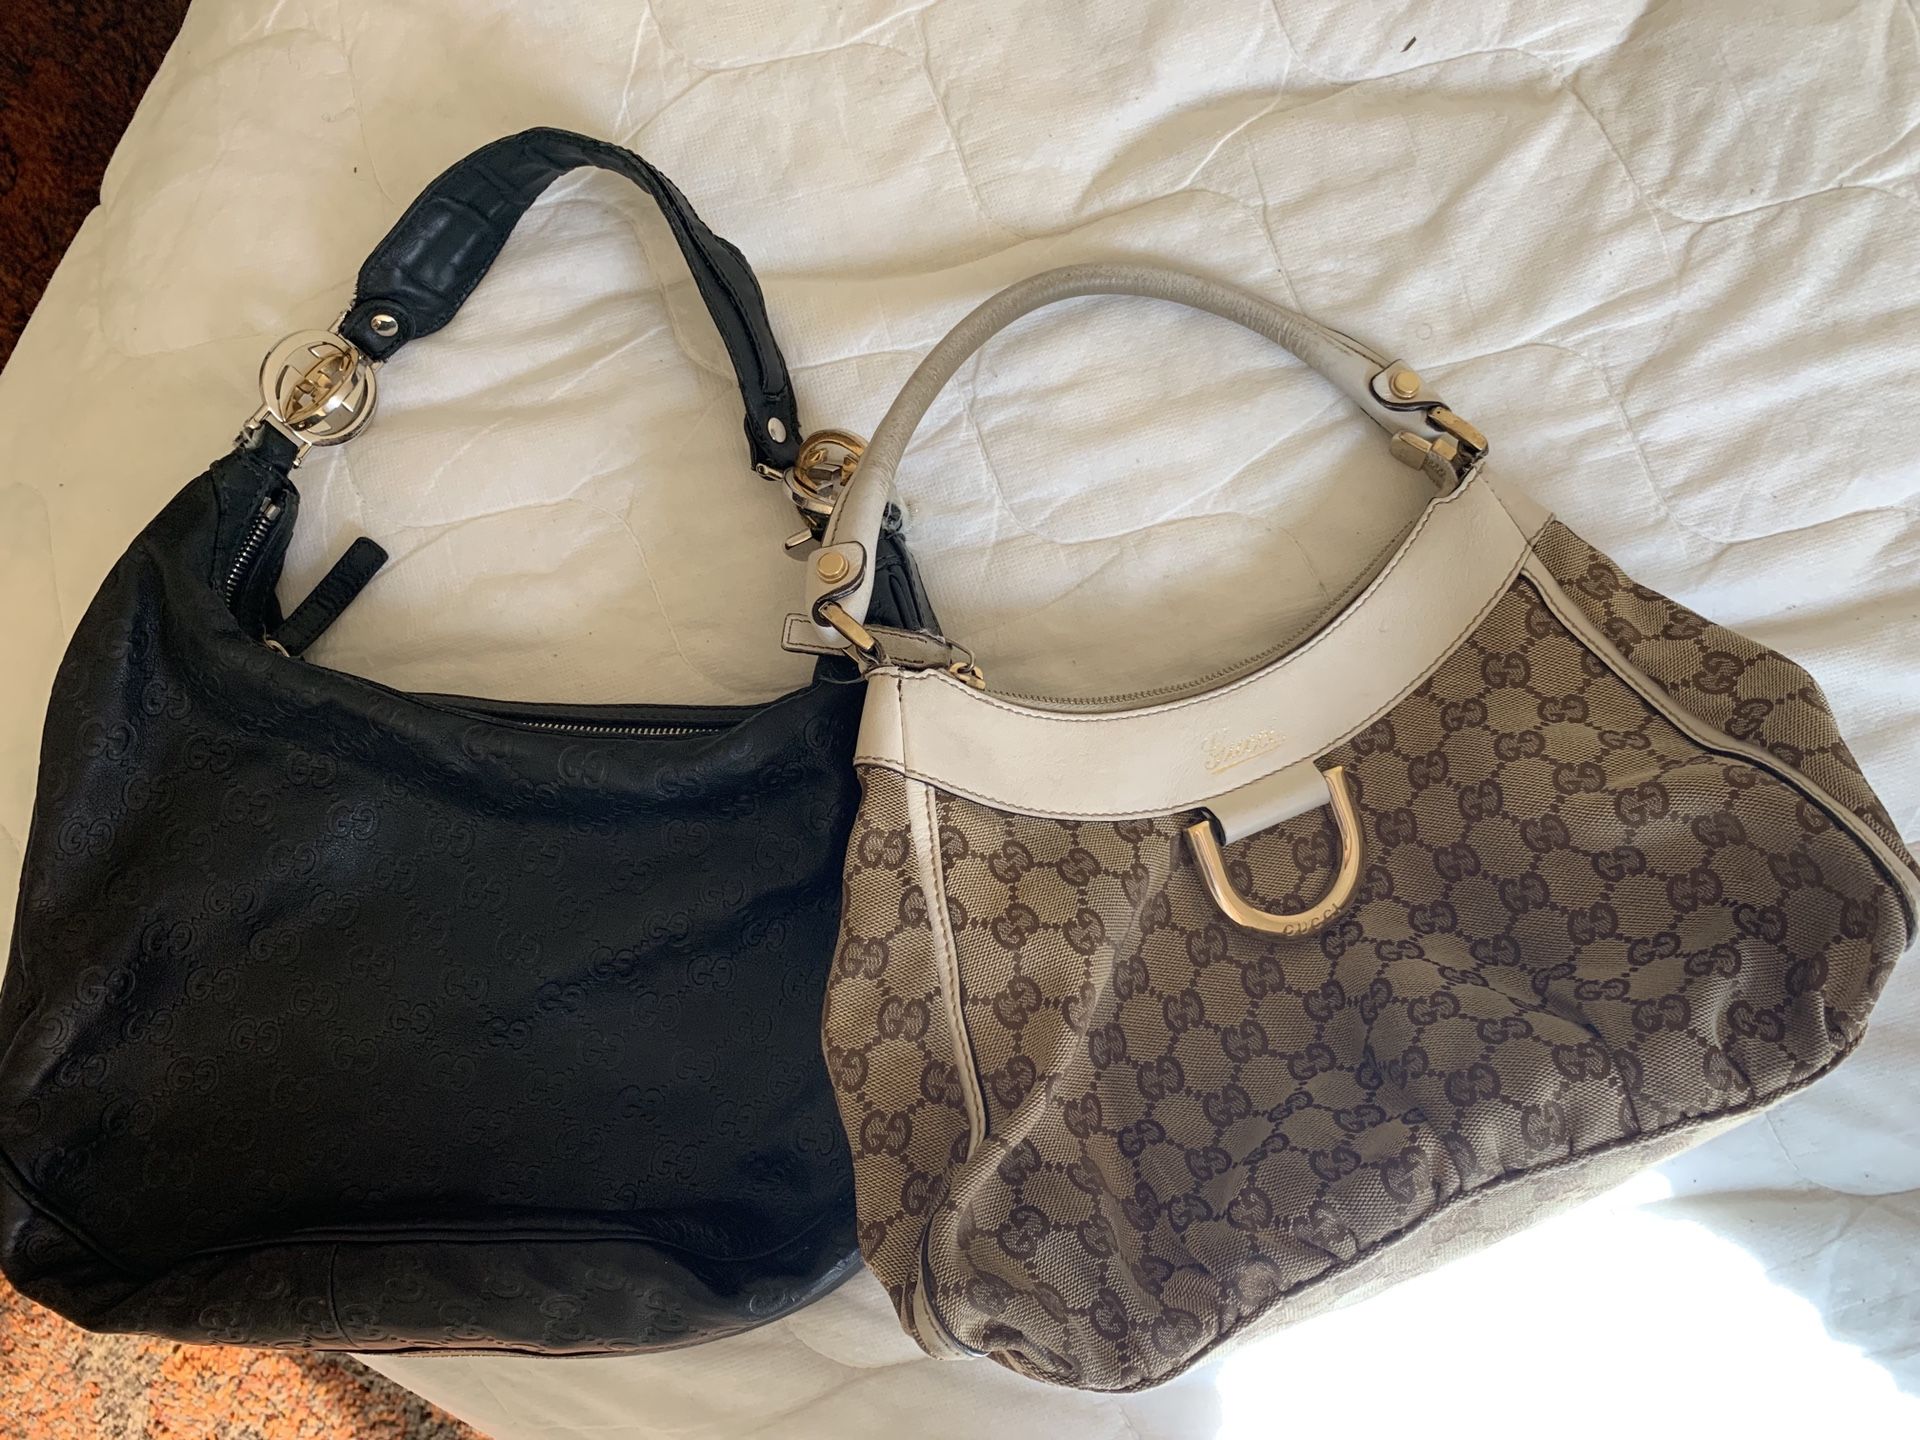 Two authentic Gucci bags